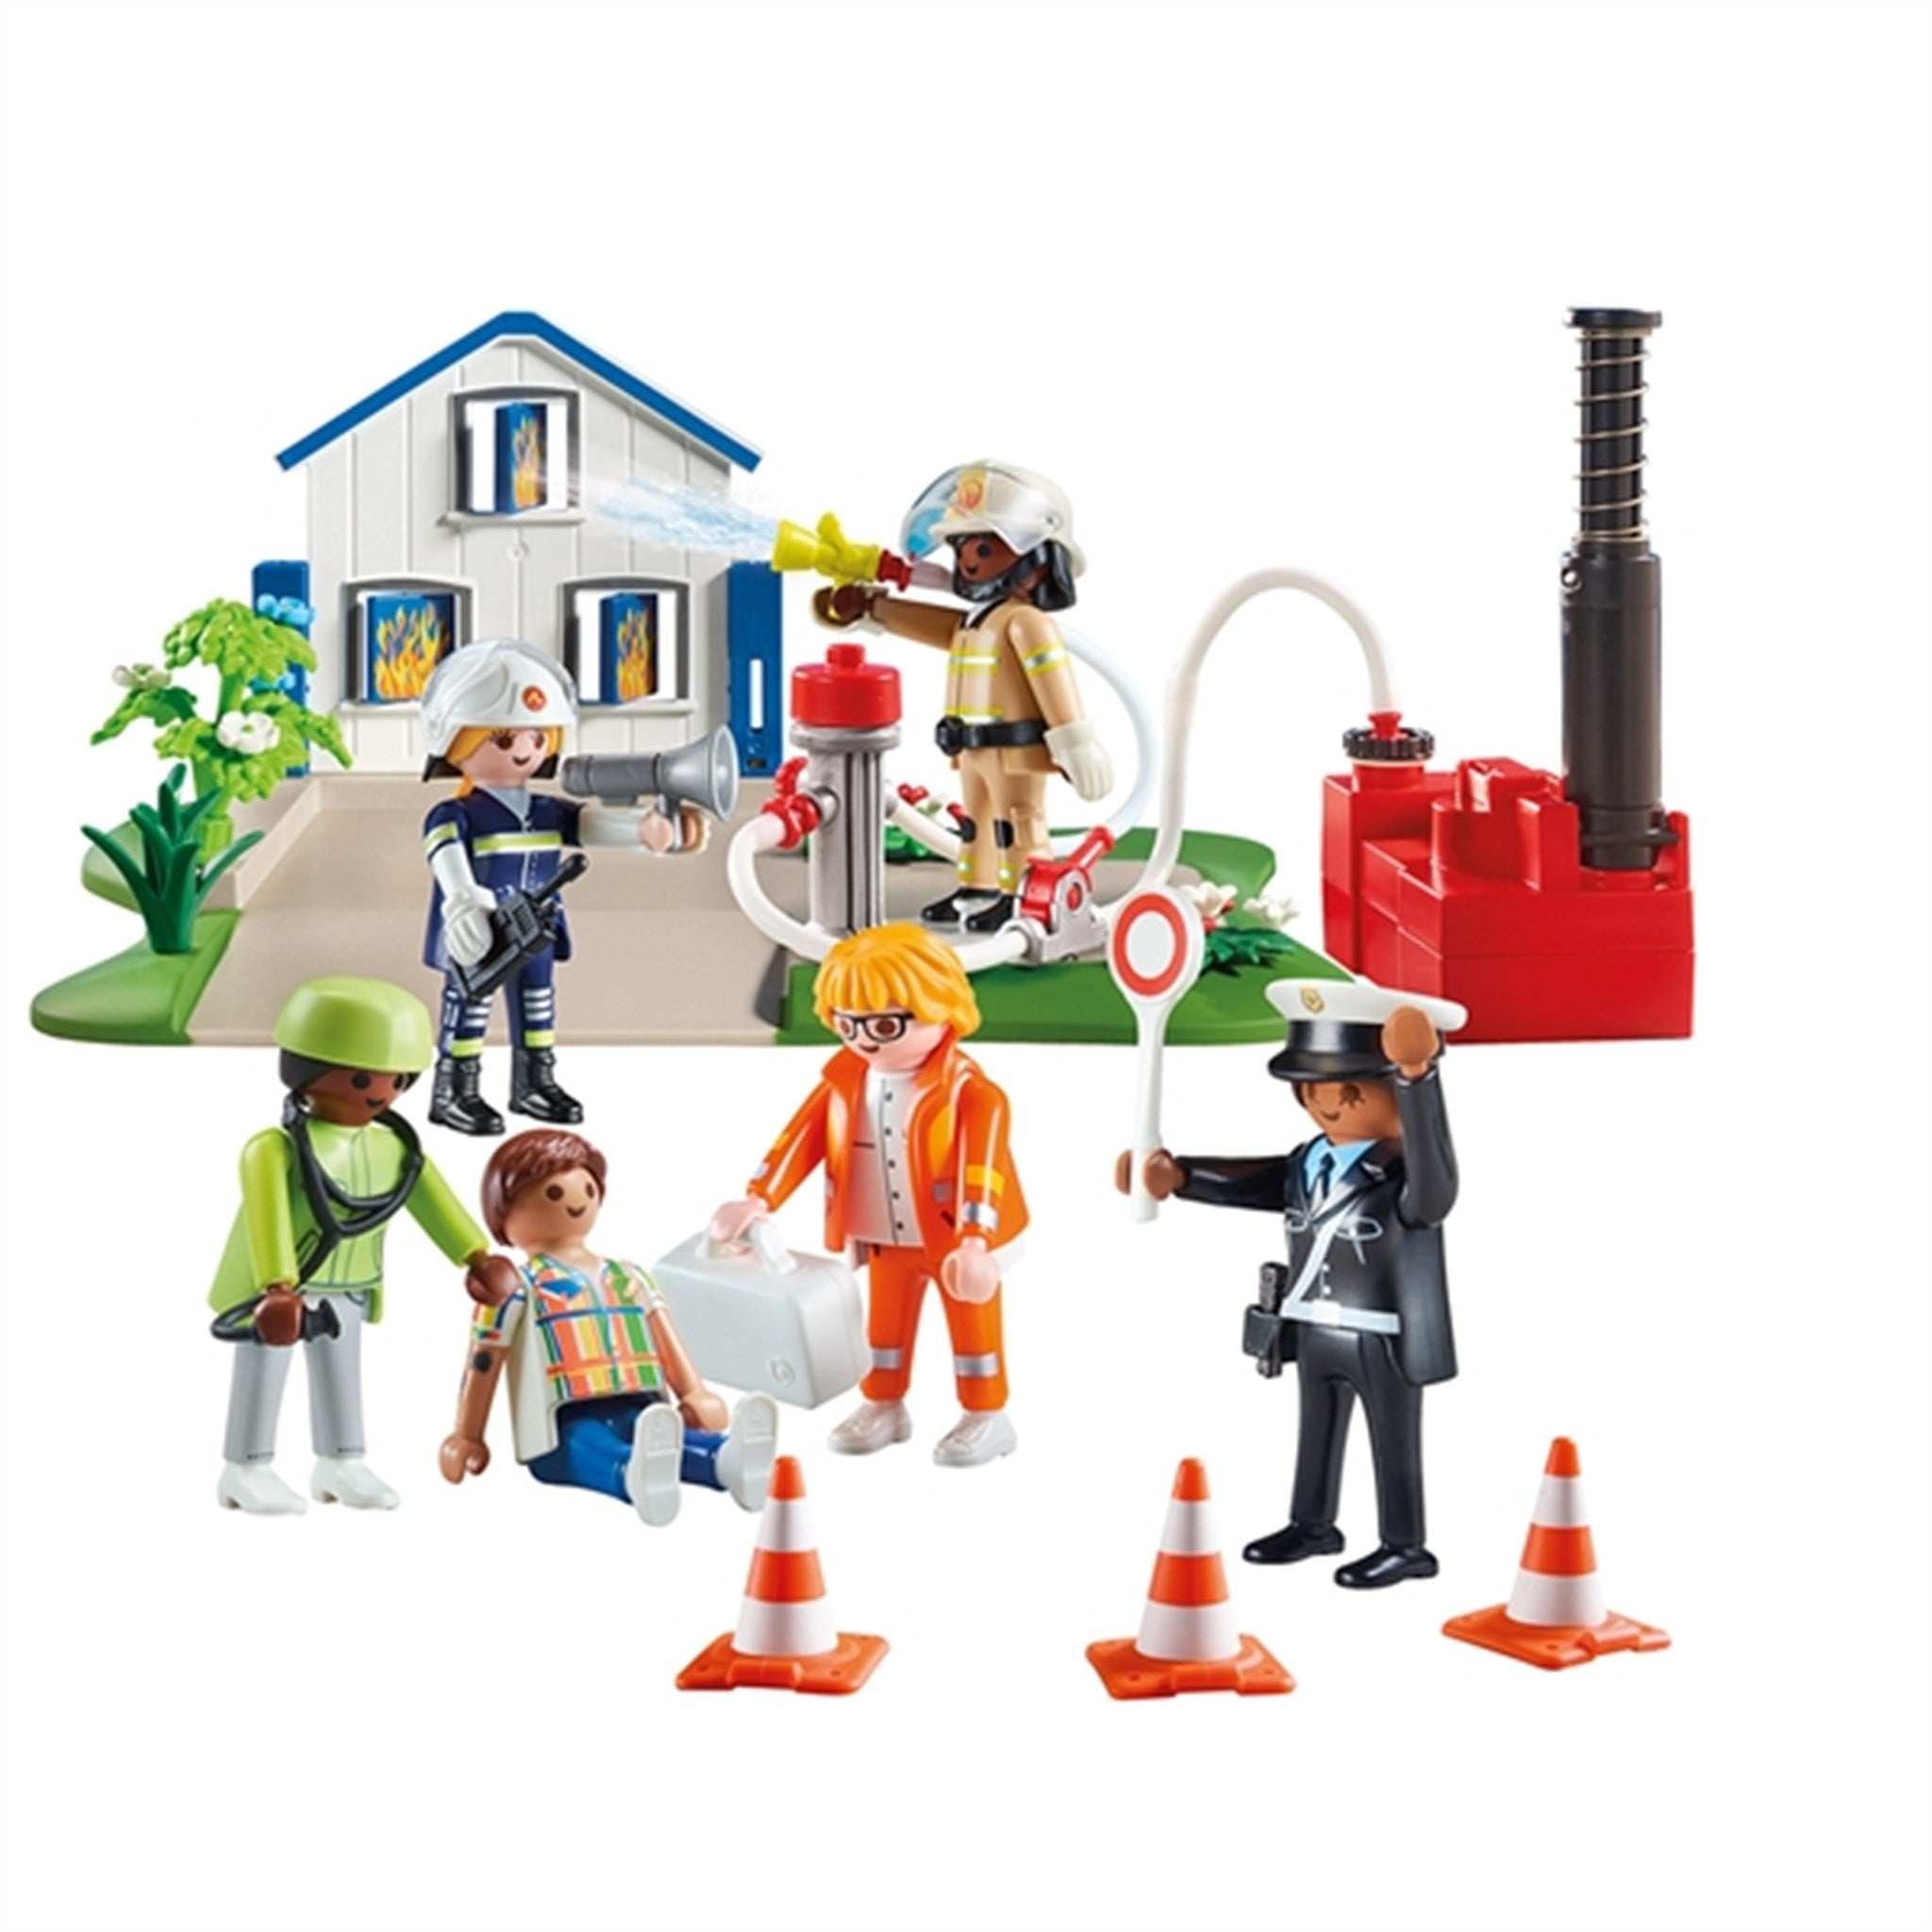 Playmobil® Figures - My Figures: Rescue Mission 4